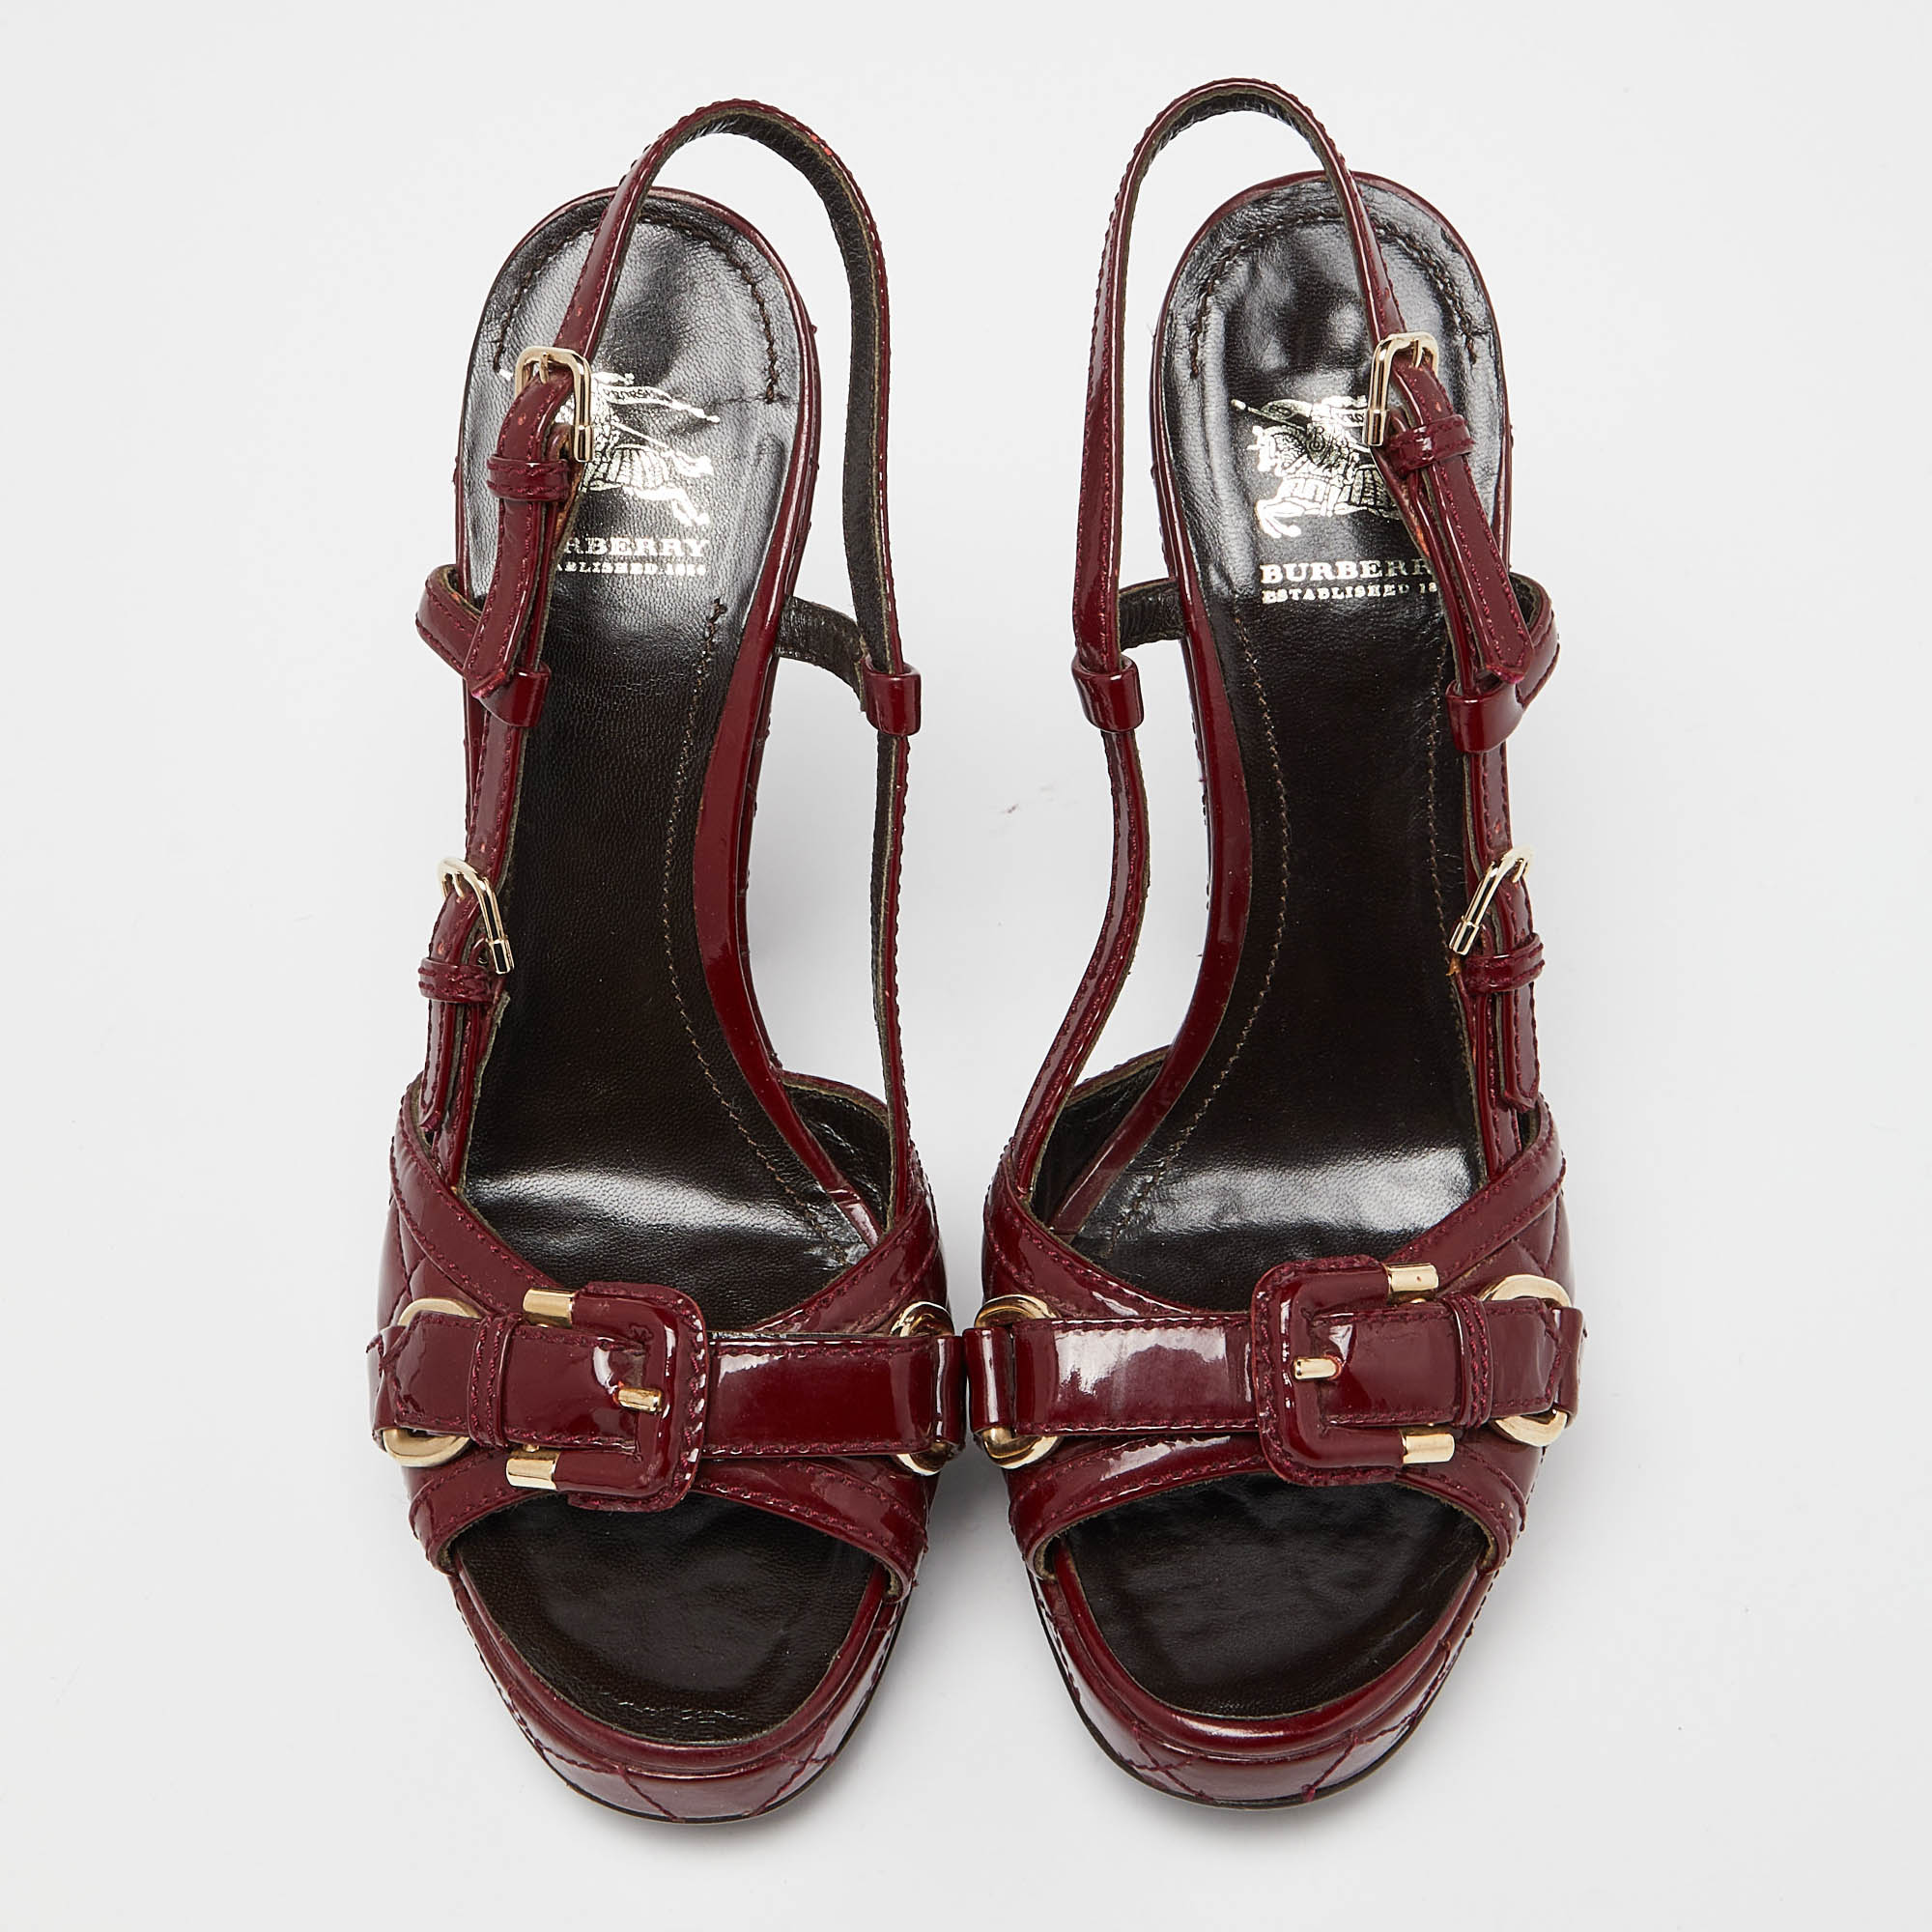 Burberry Burgundy Quilted Patent Leather Buckle Detail Platform Slingback Sandals Size 37